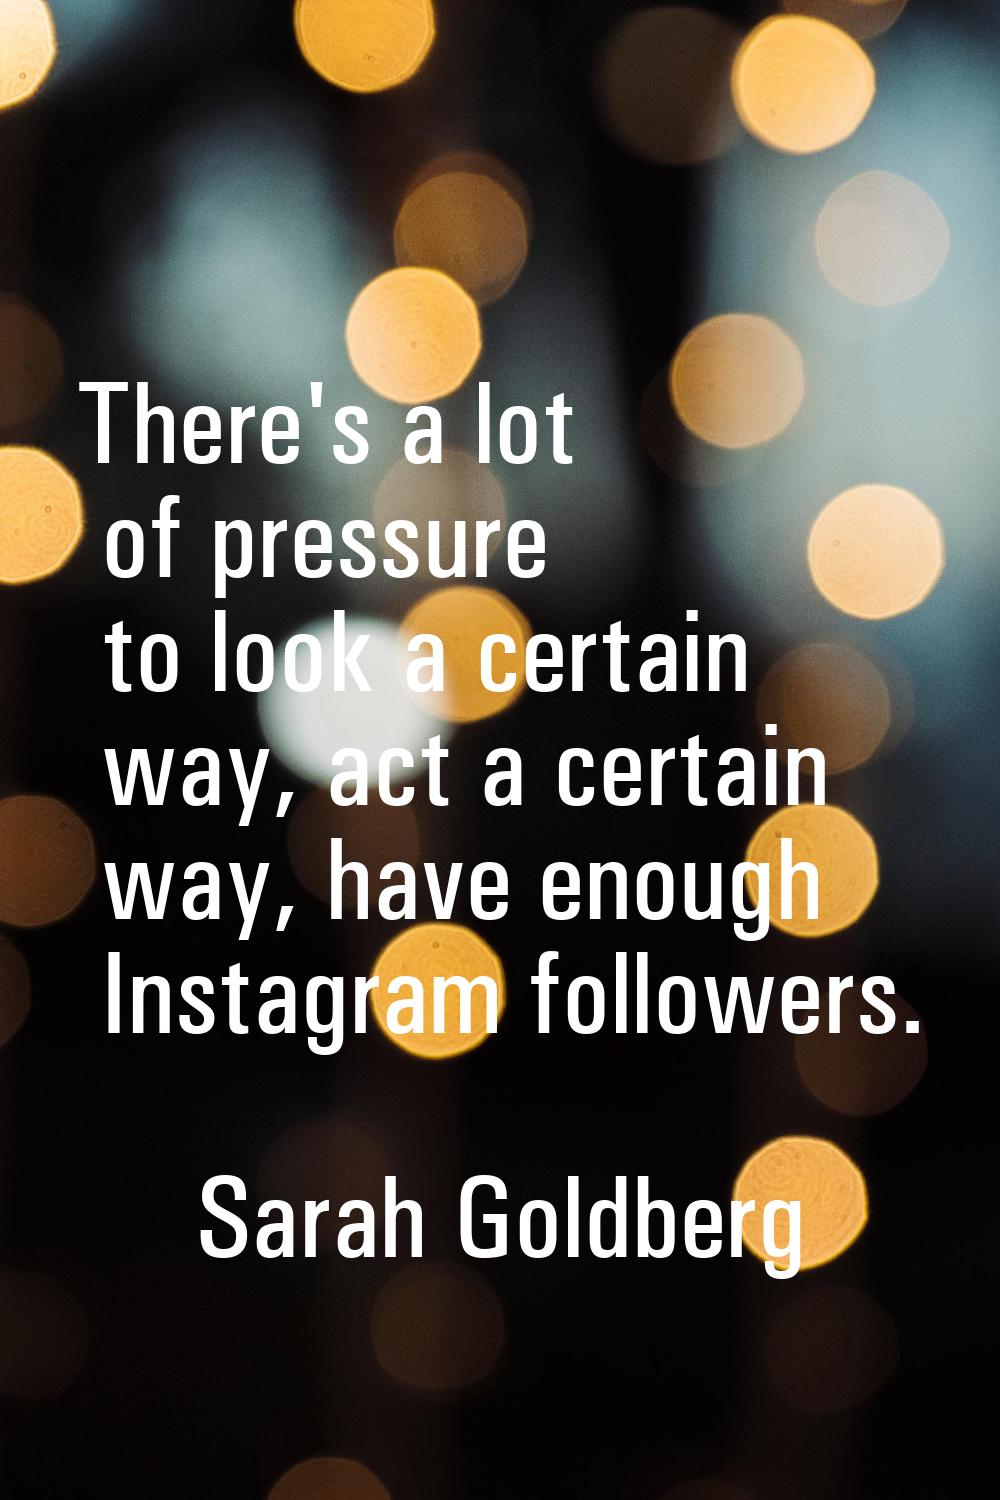 There's a lot of pressure to look a certain way, act a certain way, have enough Instagram followers